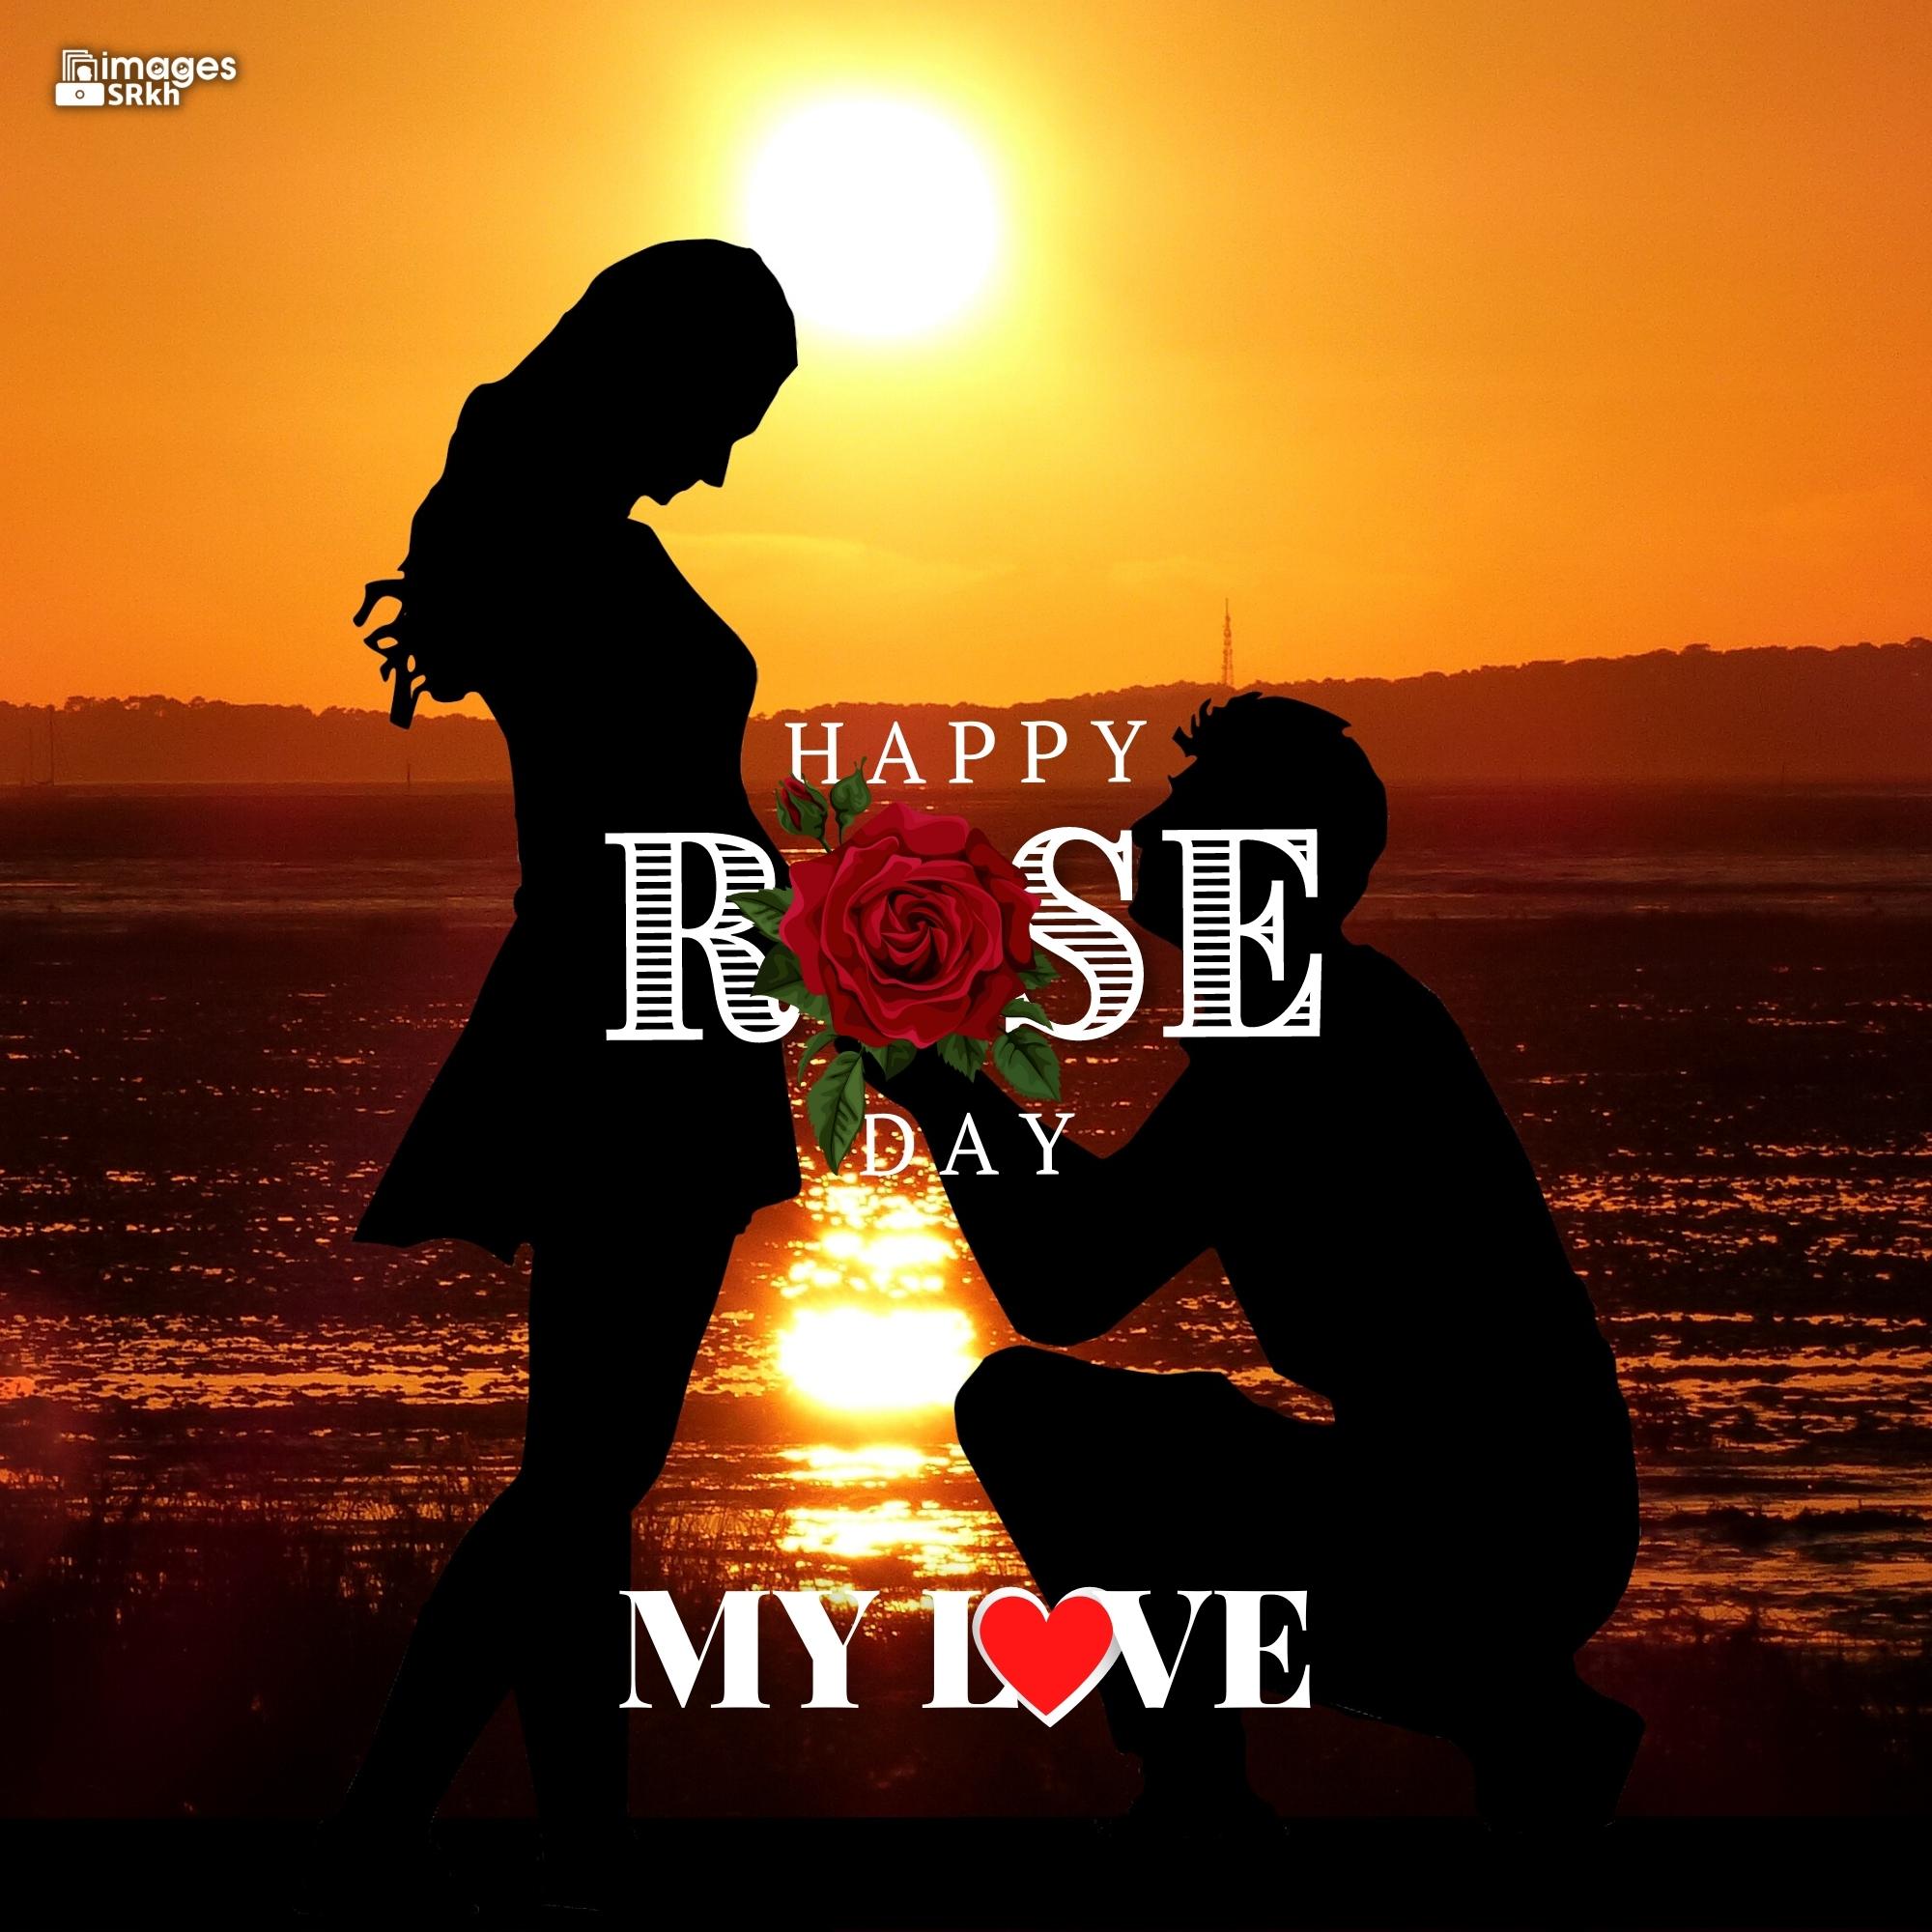 Happy Rose Day My Love (14) | HD IMAGES